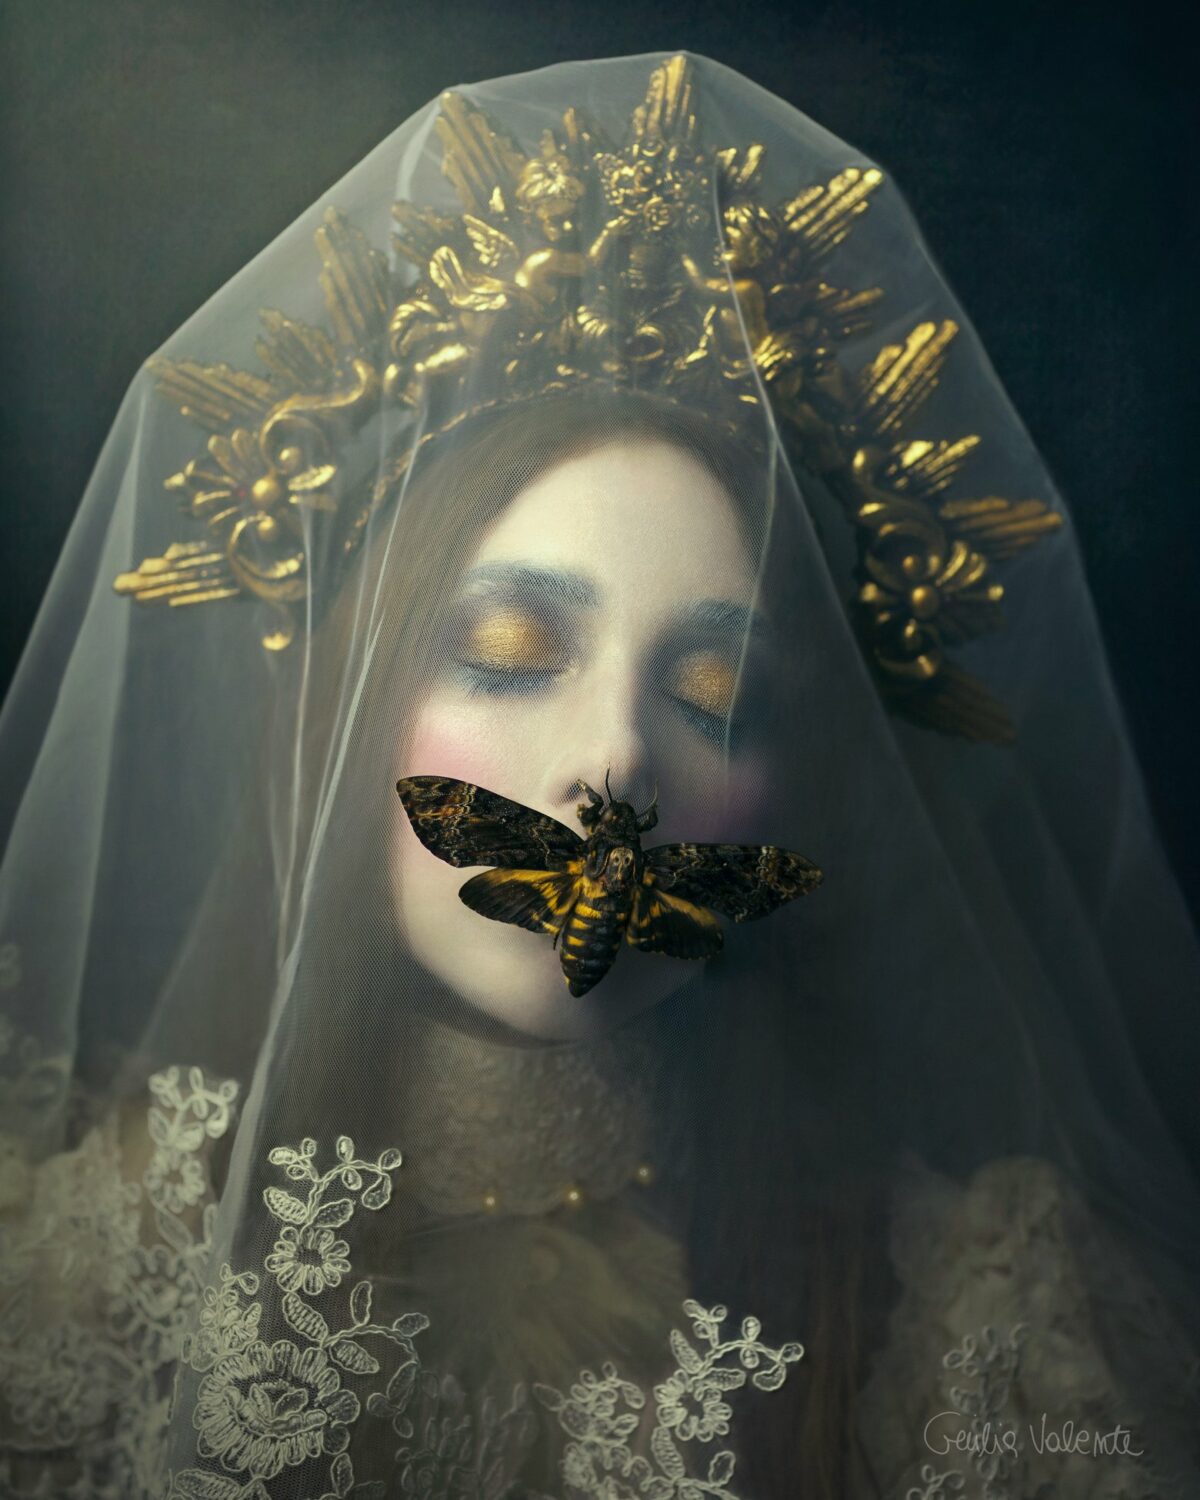 Wonderful digital collages inspired by Renaissance and vintage aesthetics by Giulia Valente